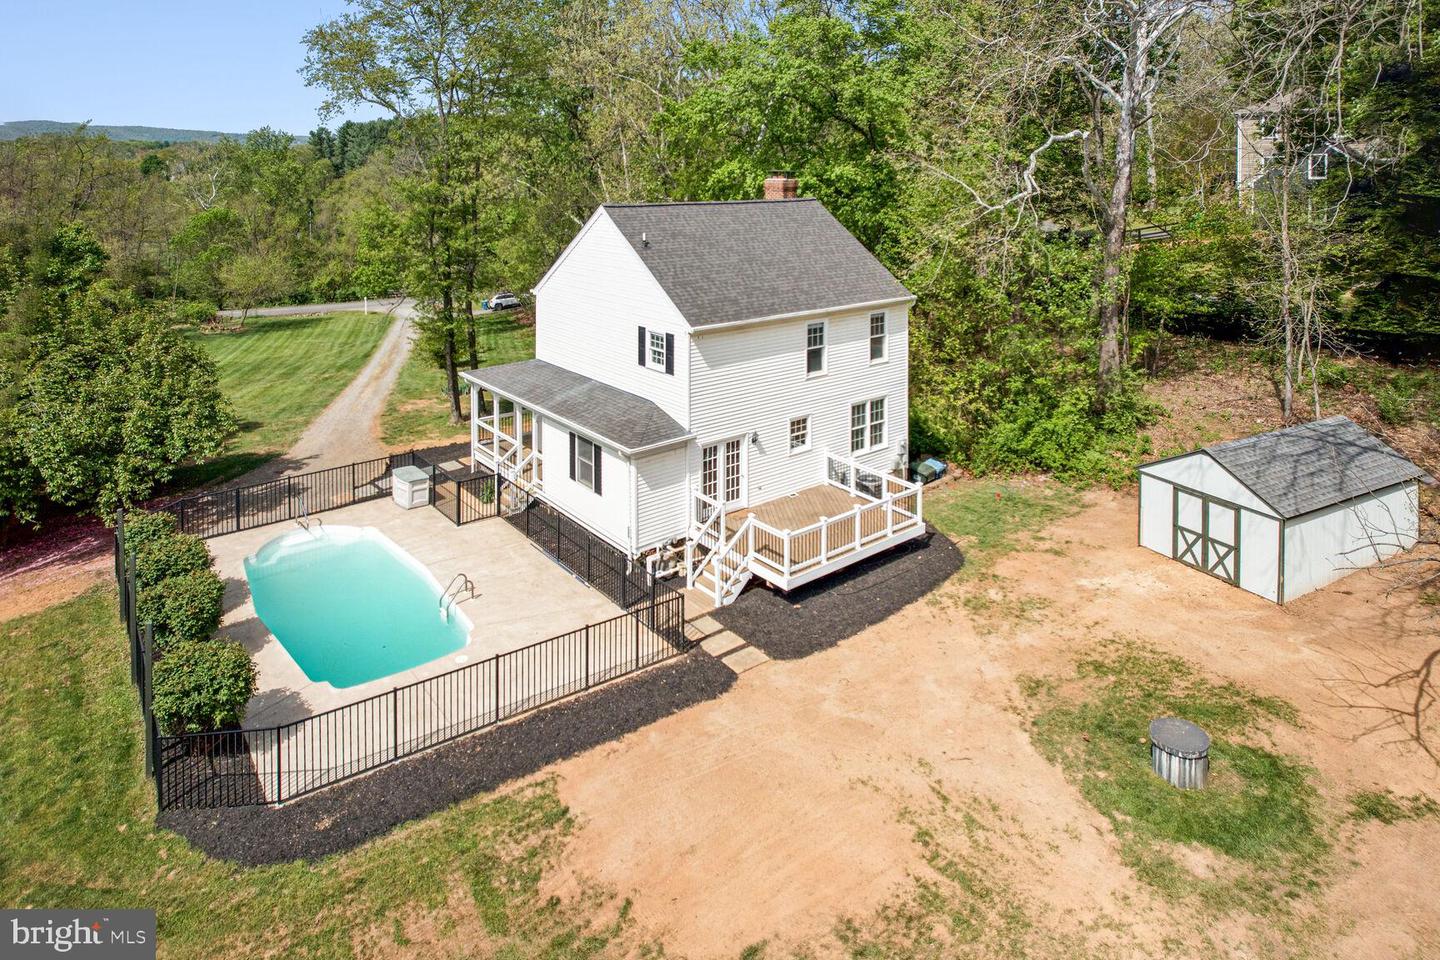 35340 SCOTLAND HEIGHTS ROAD, ROUND HILL, Virginia 20141, 3 Bedrooms Bedrooms, ,3 BathroomsBathrooms,Residential,For sale,35340 SCOTLAND HEIGHTS ROAD,VALO2067000 MLS # VALO2067000